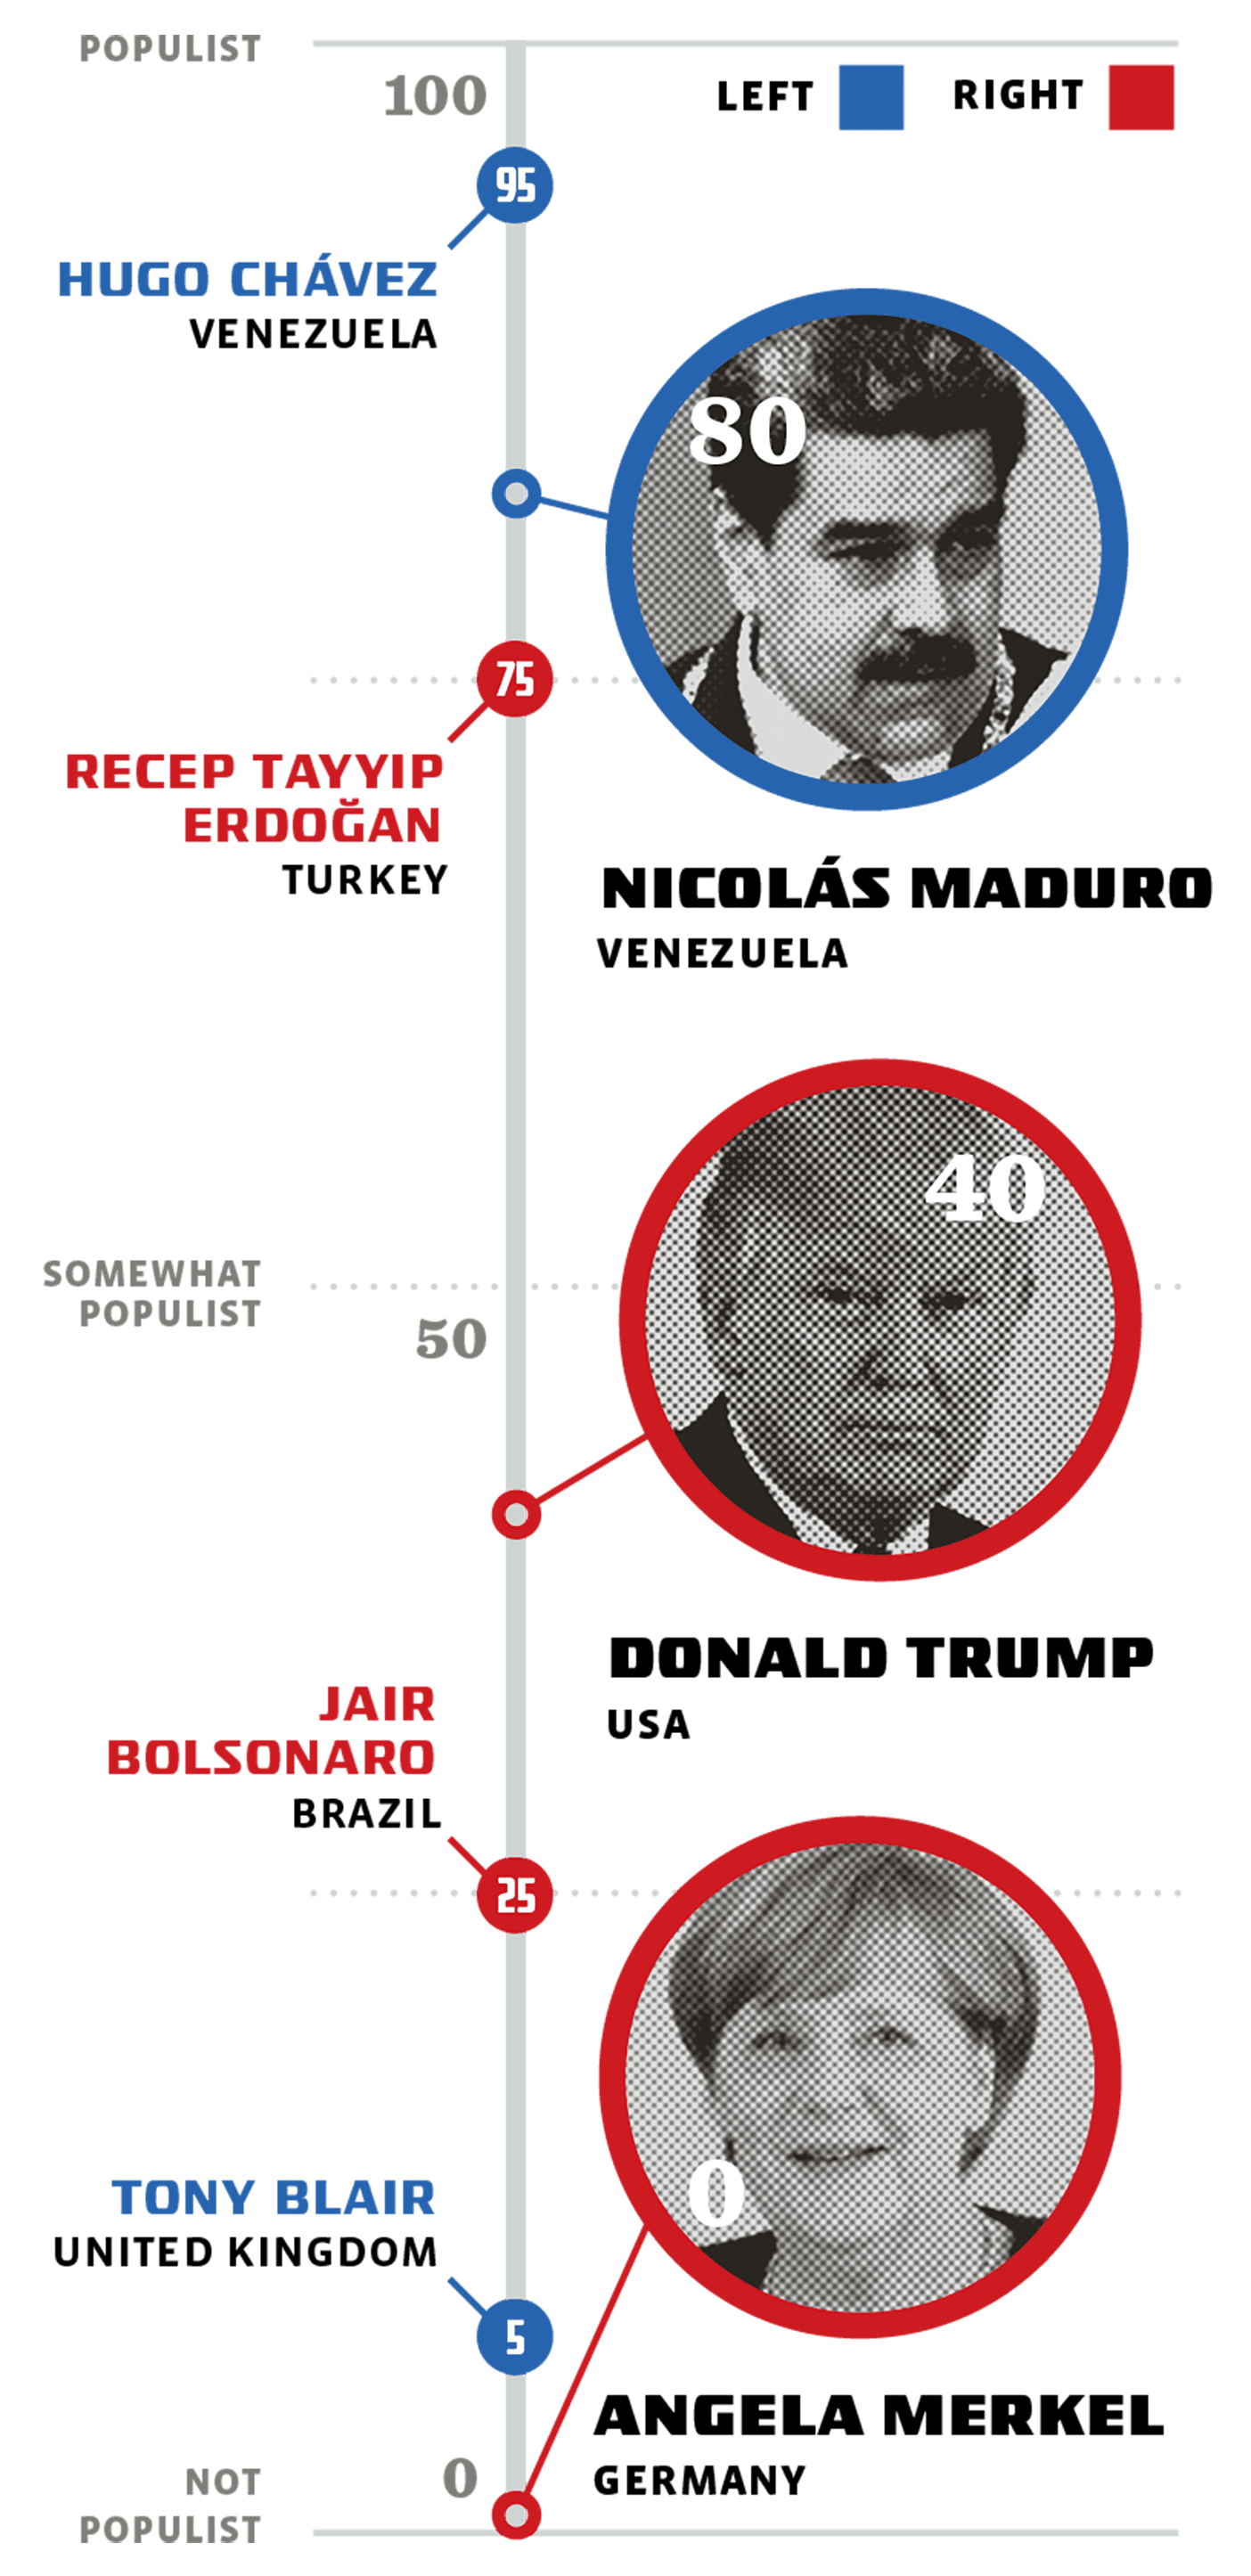 A vertical chart goes from populist down to not populist listing in order from top to bottom: Hugo Chavez, Nicolas Madura, Donald Trump, and Angela Merkel.